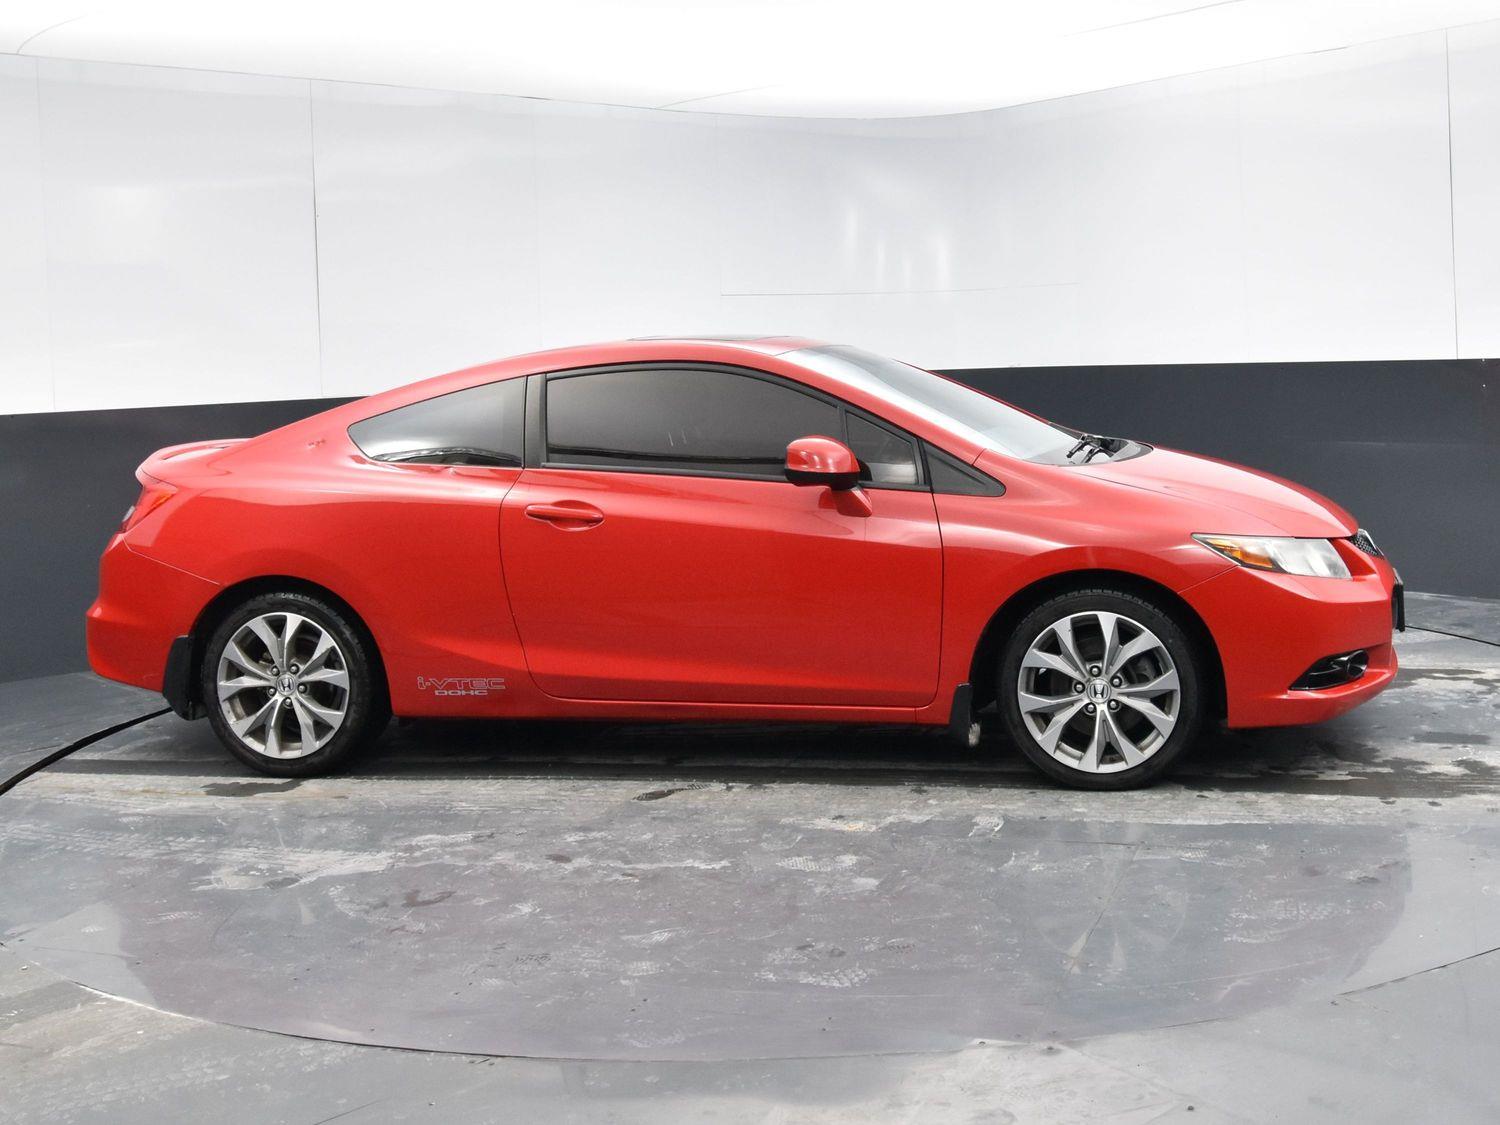 Used 2012 Honda Civic Cpe Si 2 Door Coupe for sale in Grand Island NE